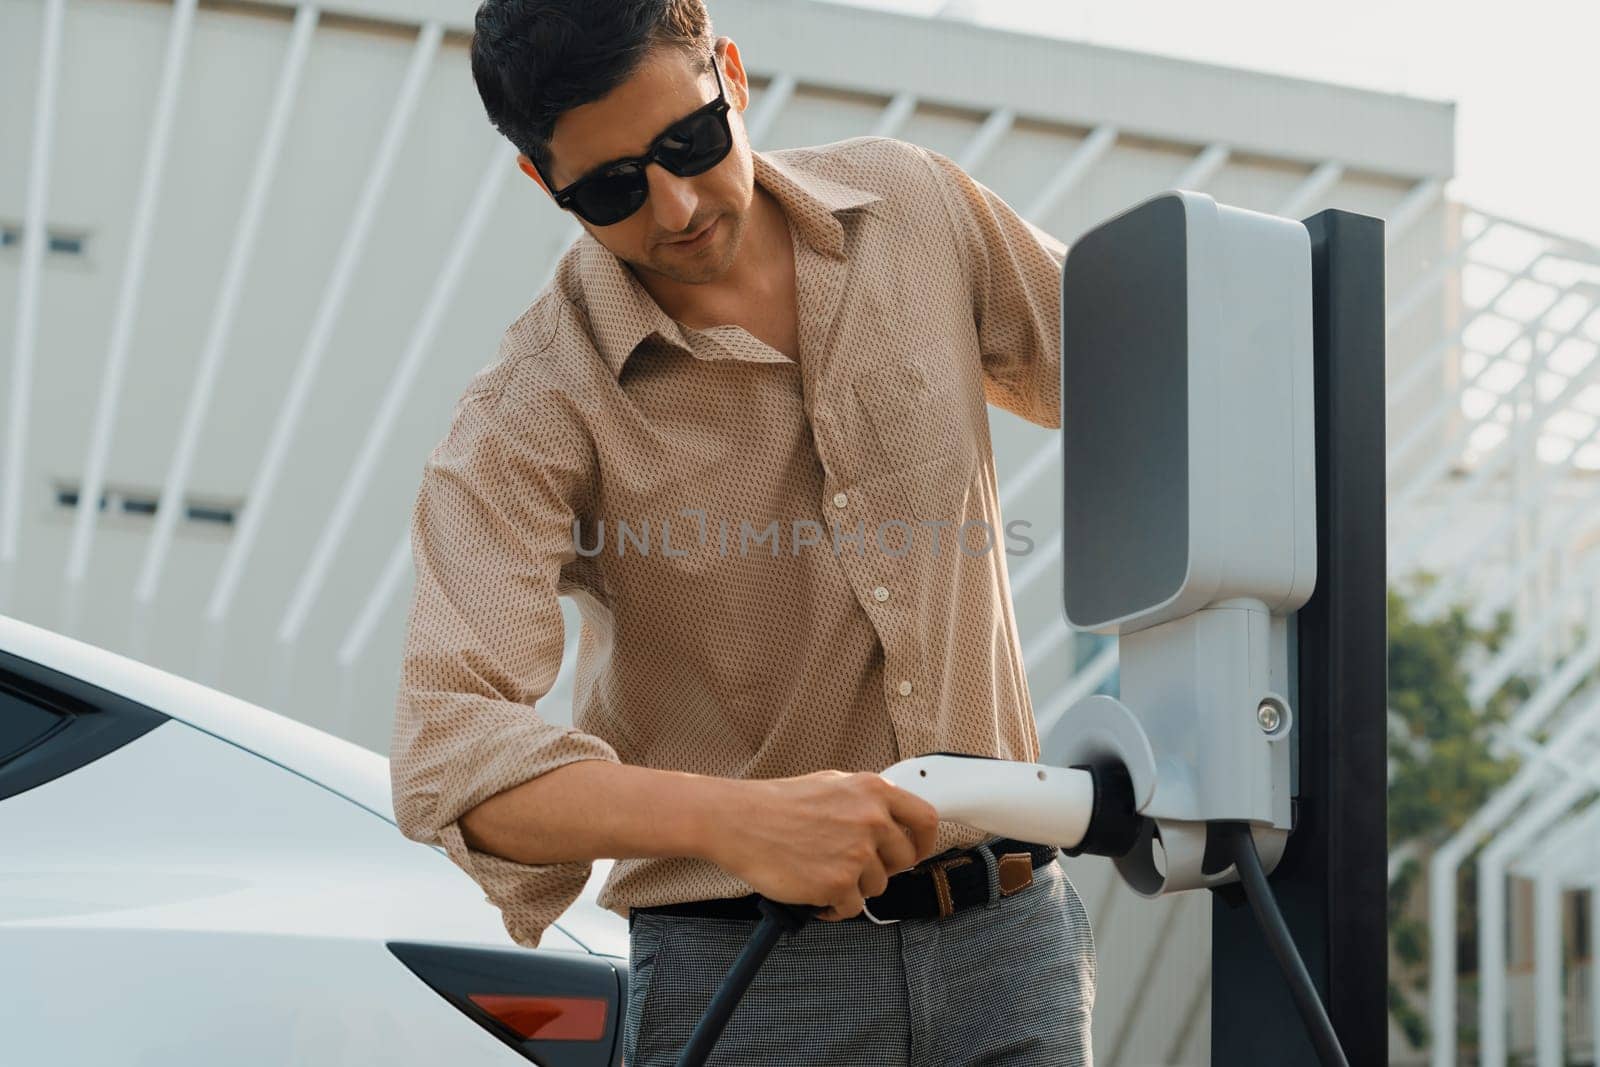 Young man put EV charger to recharge electric car battery. Expedient by biancoblue